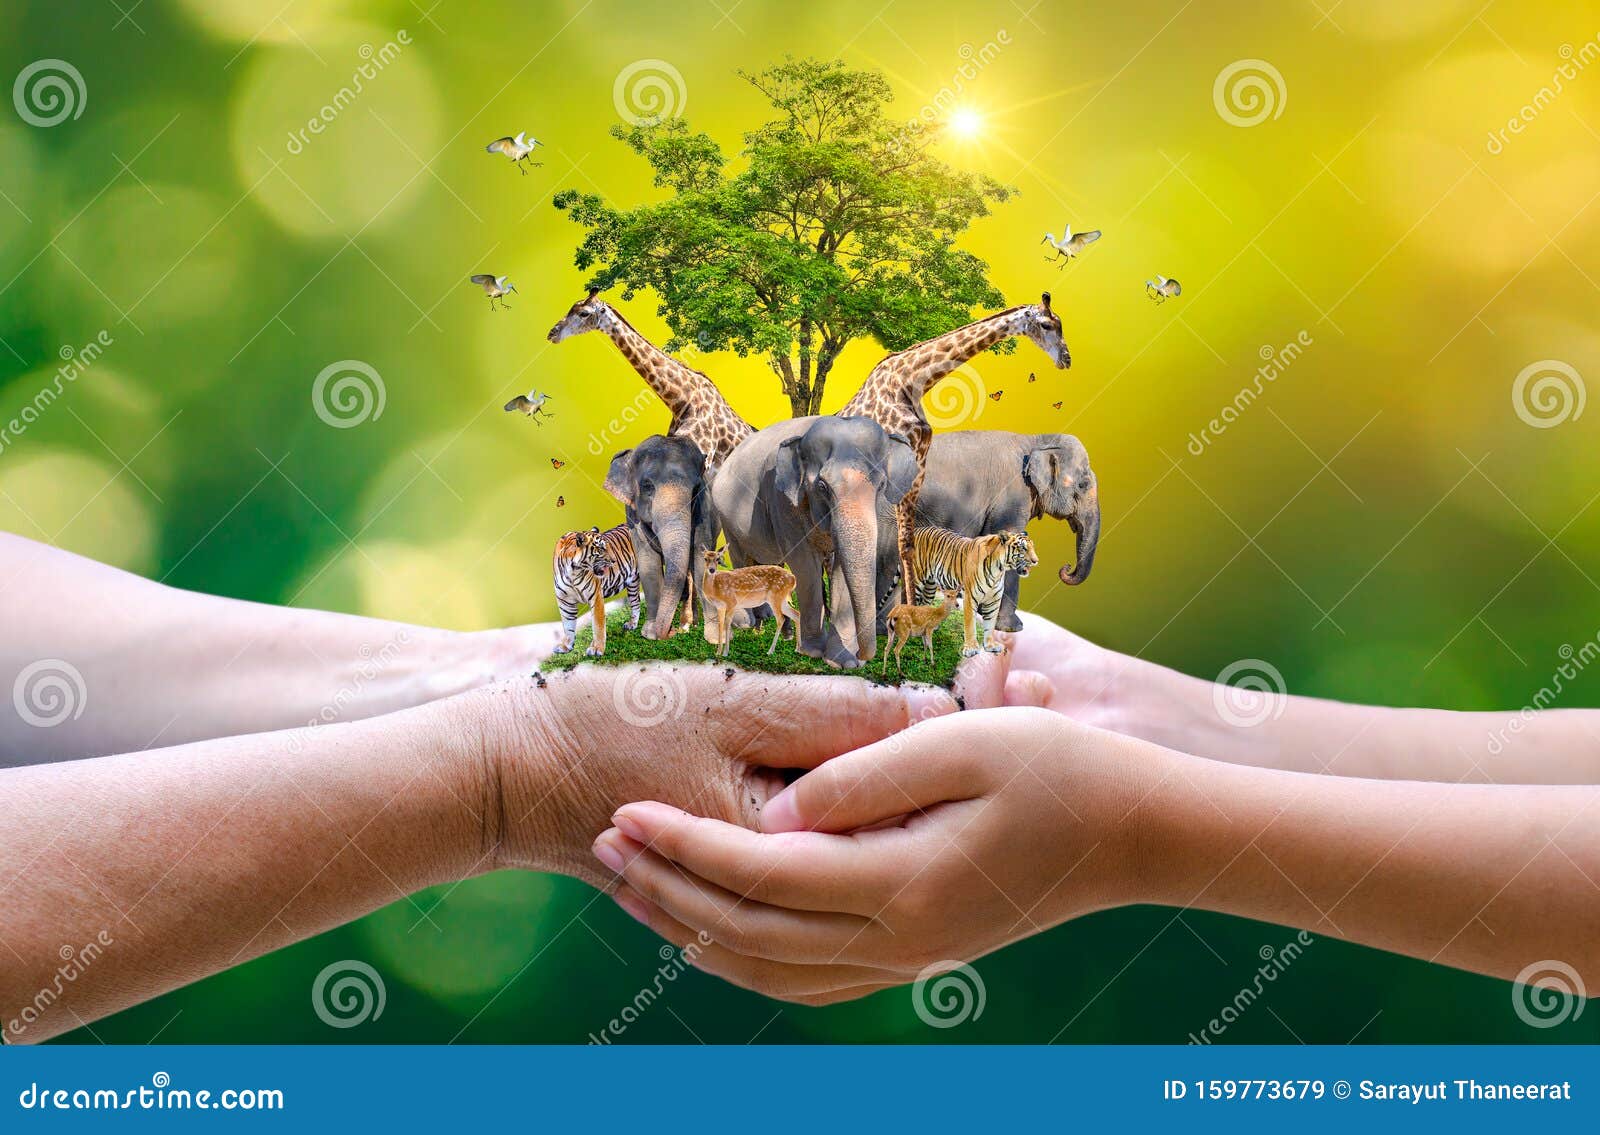 Concept Nature Reserve Conserve Wildlife Reserve Deer Global Warming Food Loaf Human Hands Protecting the Wild and Stock Image - Image of abstract, natural: 159773679